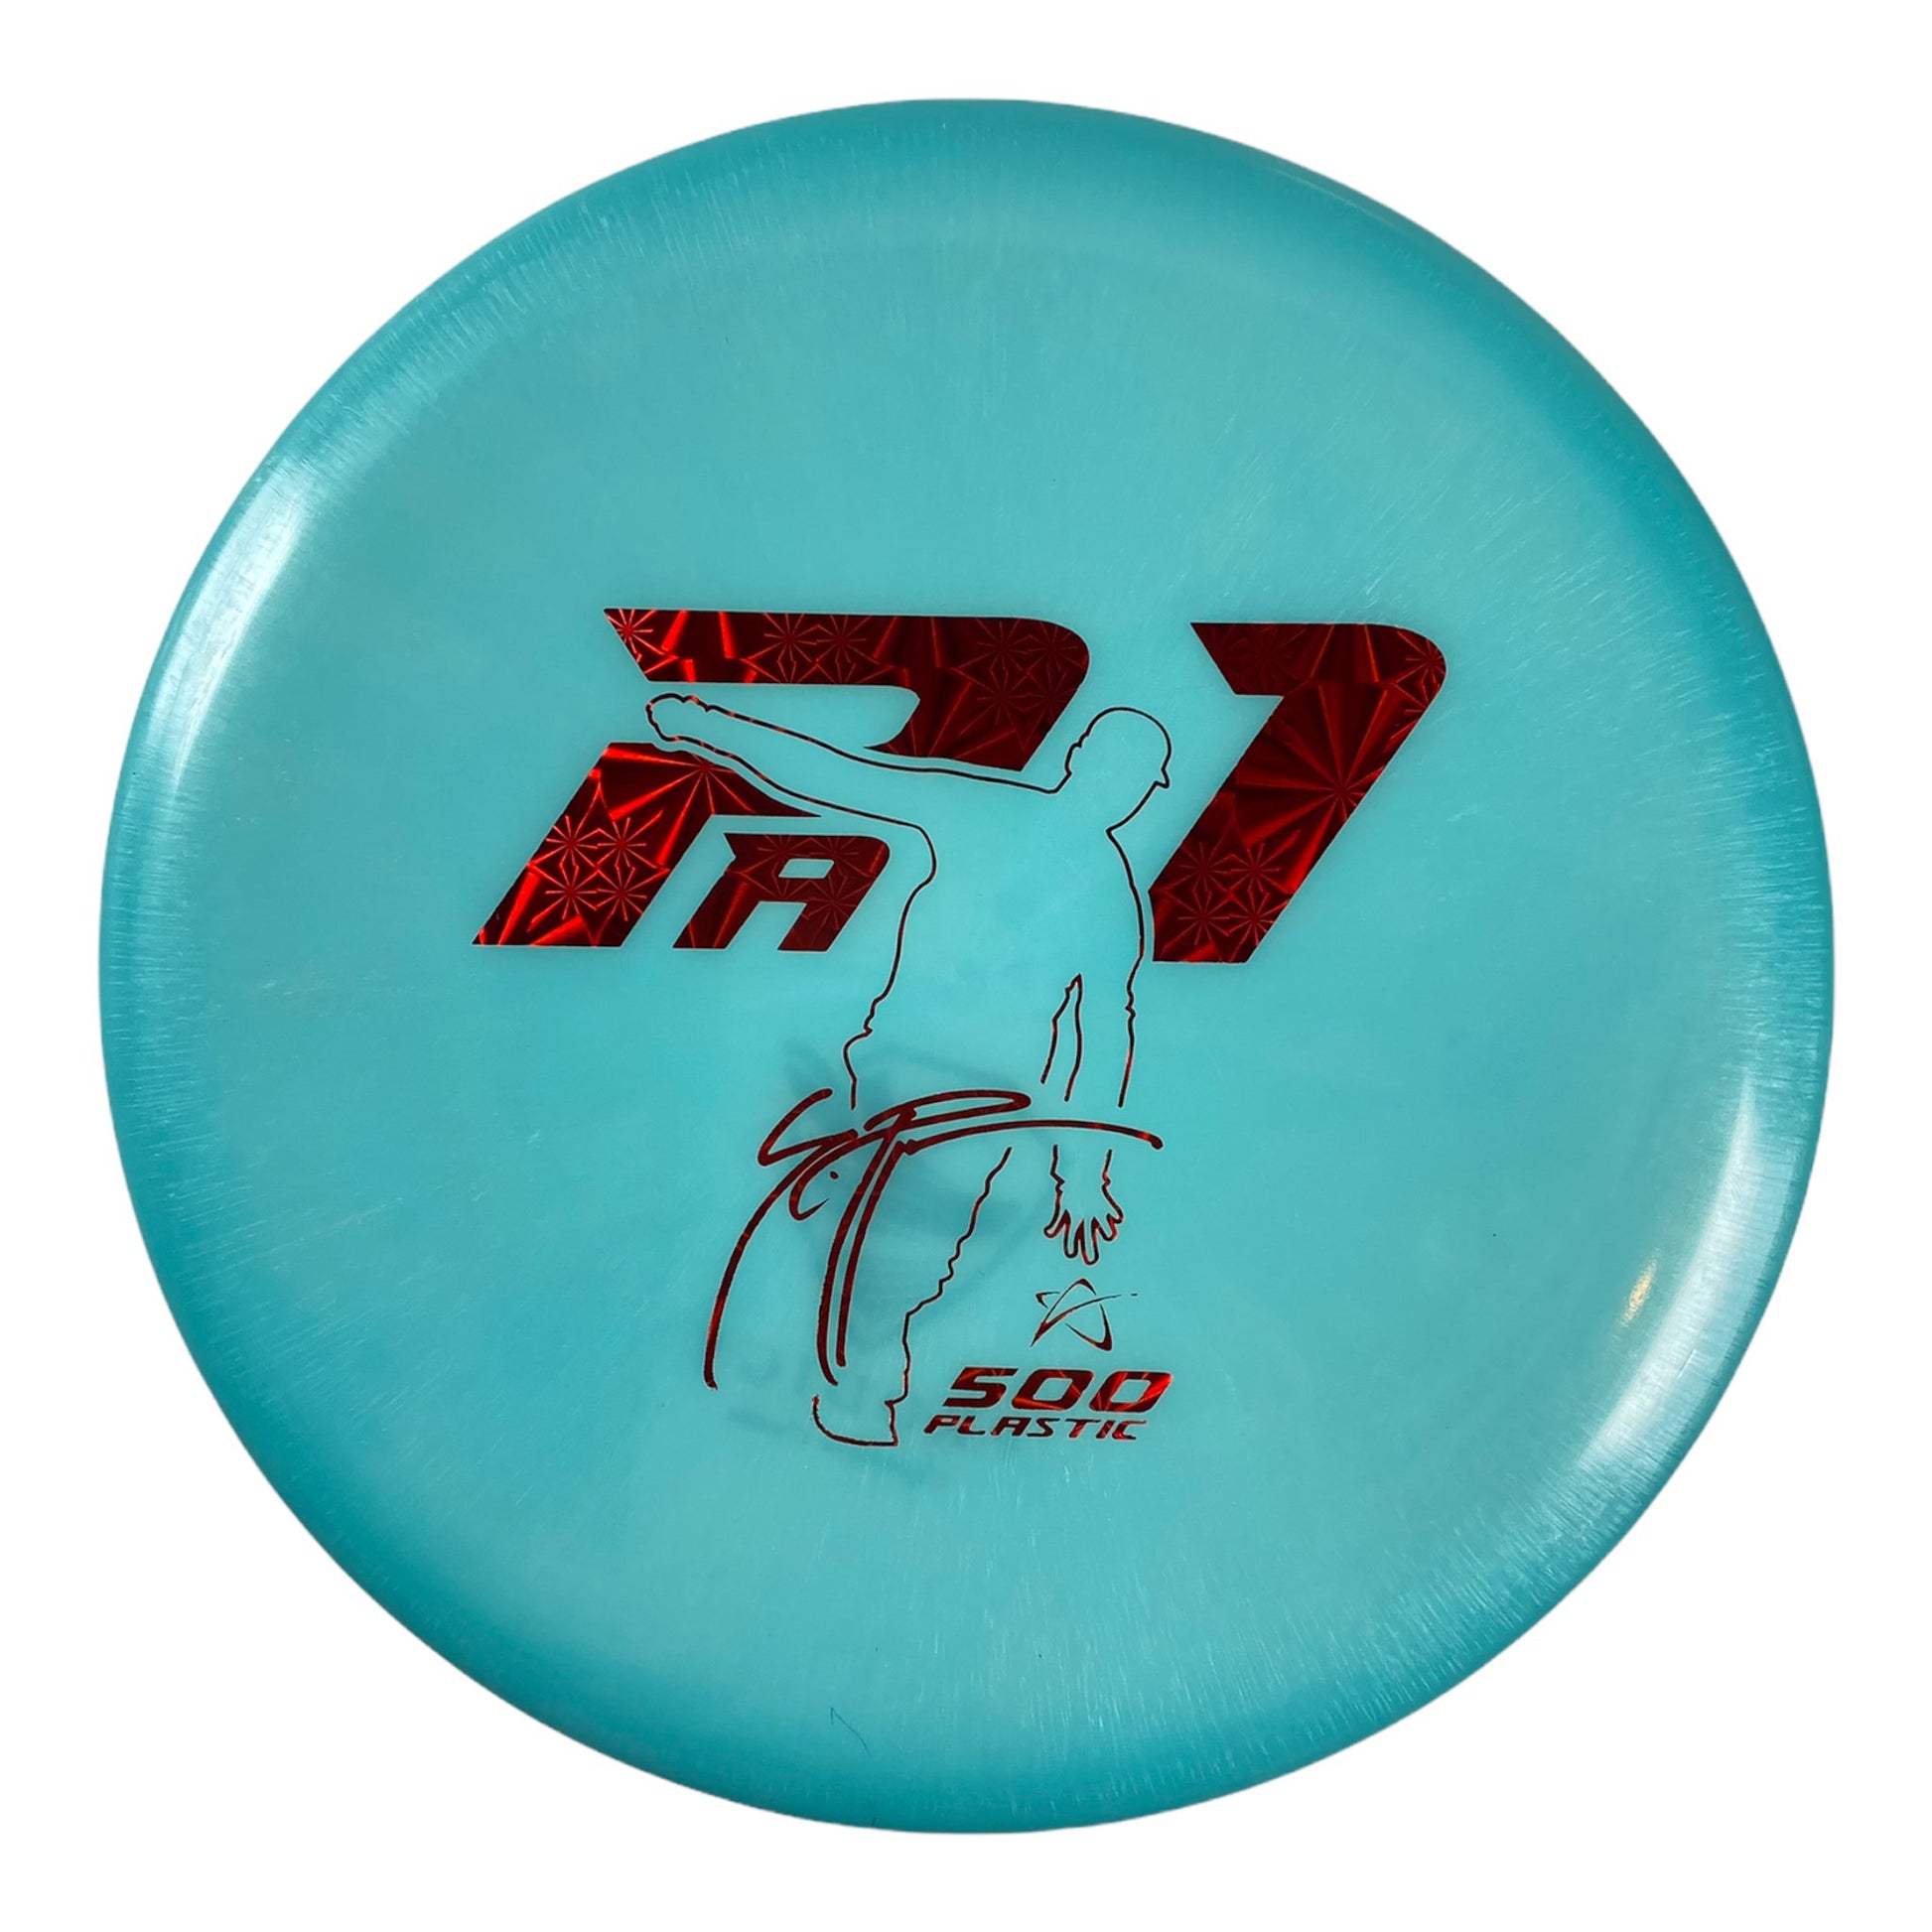 Prodigy Disc PA-1 | 500 | Blue/Red 165g Disc Golf